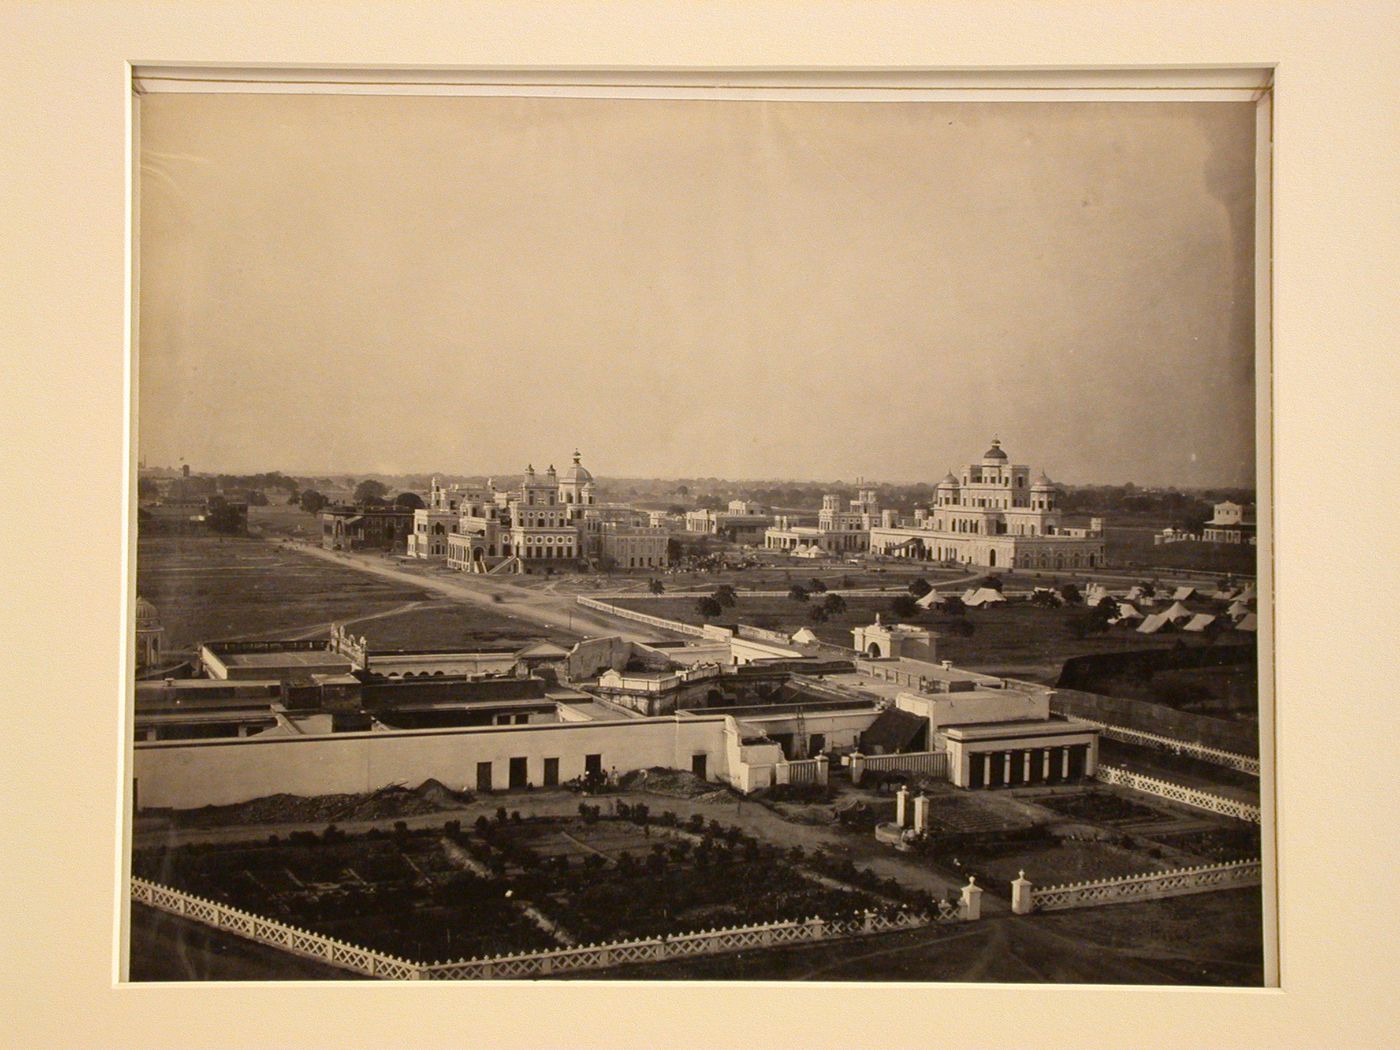 View of Lucknow showing the Chattar Manzil [Umbrella Palaces] in the background, India